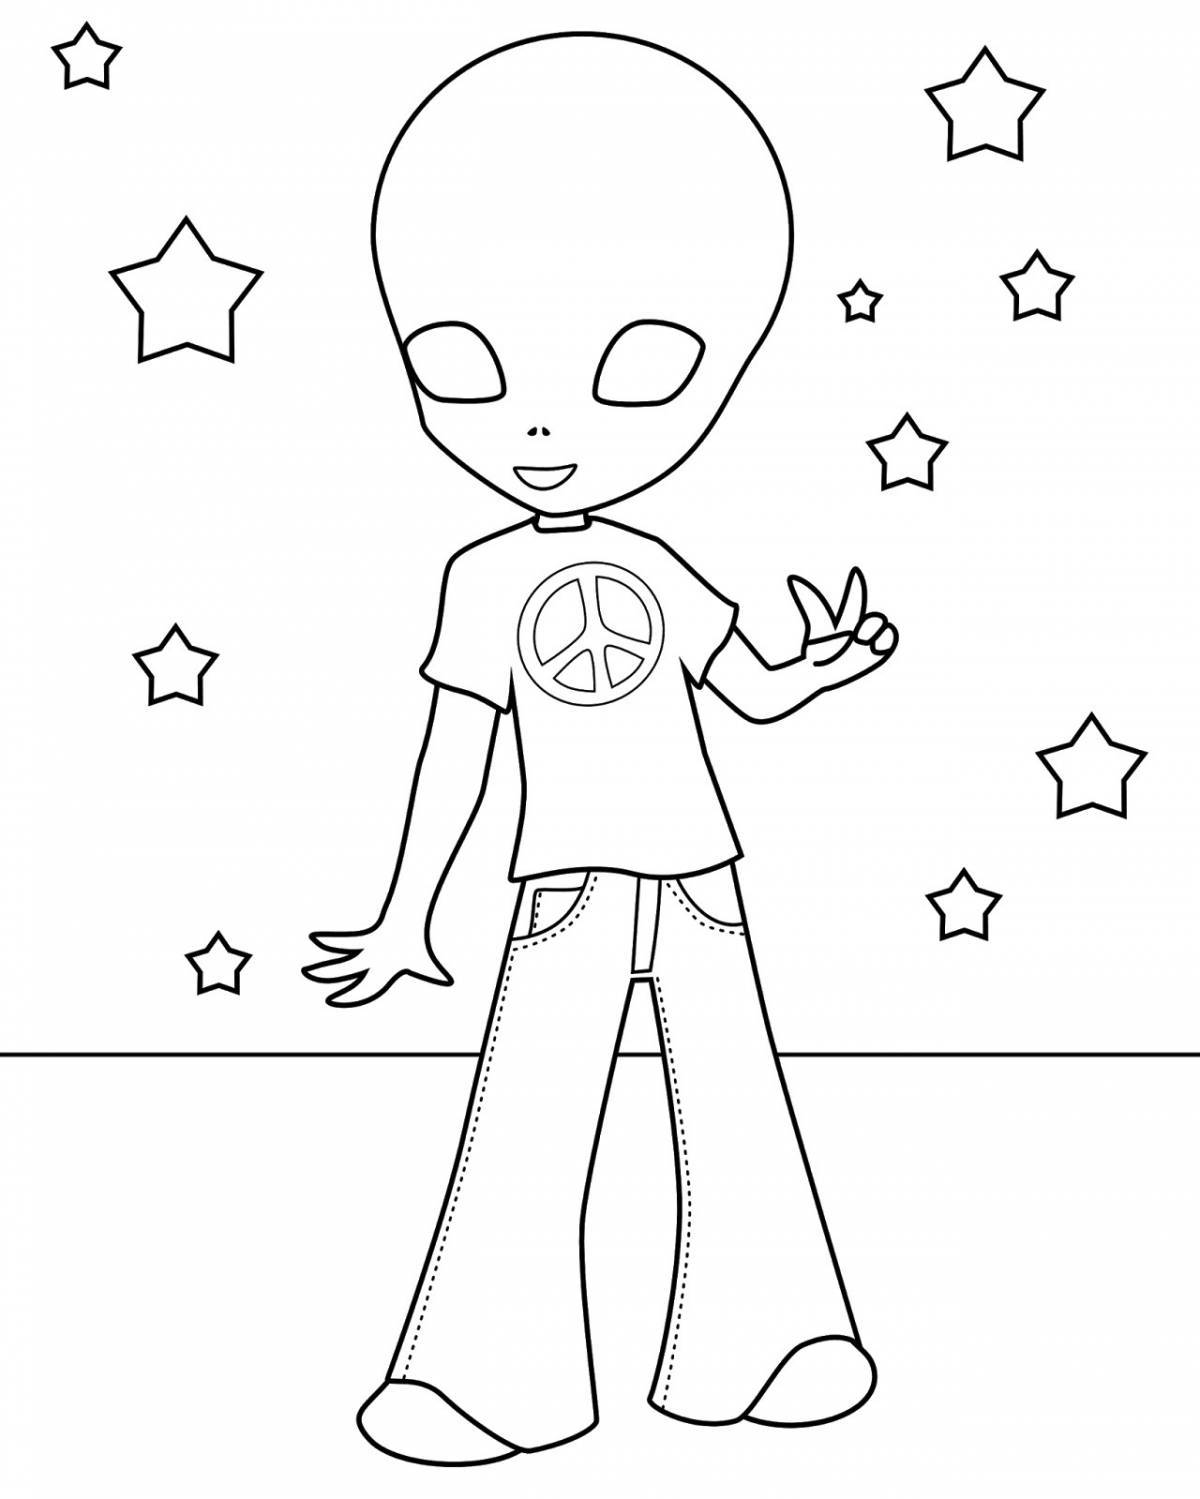 Amazing alien coloring page